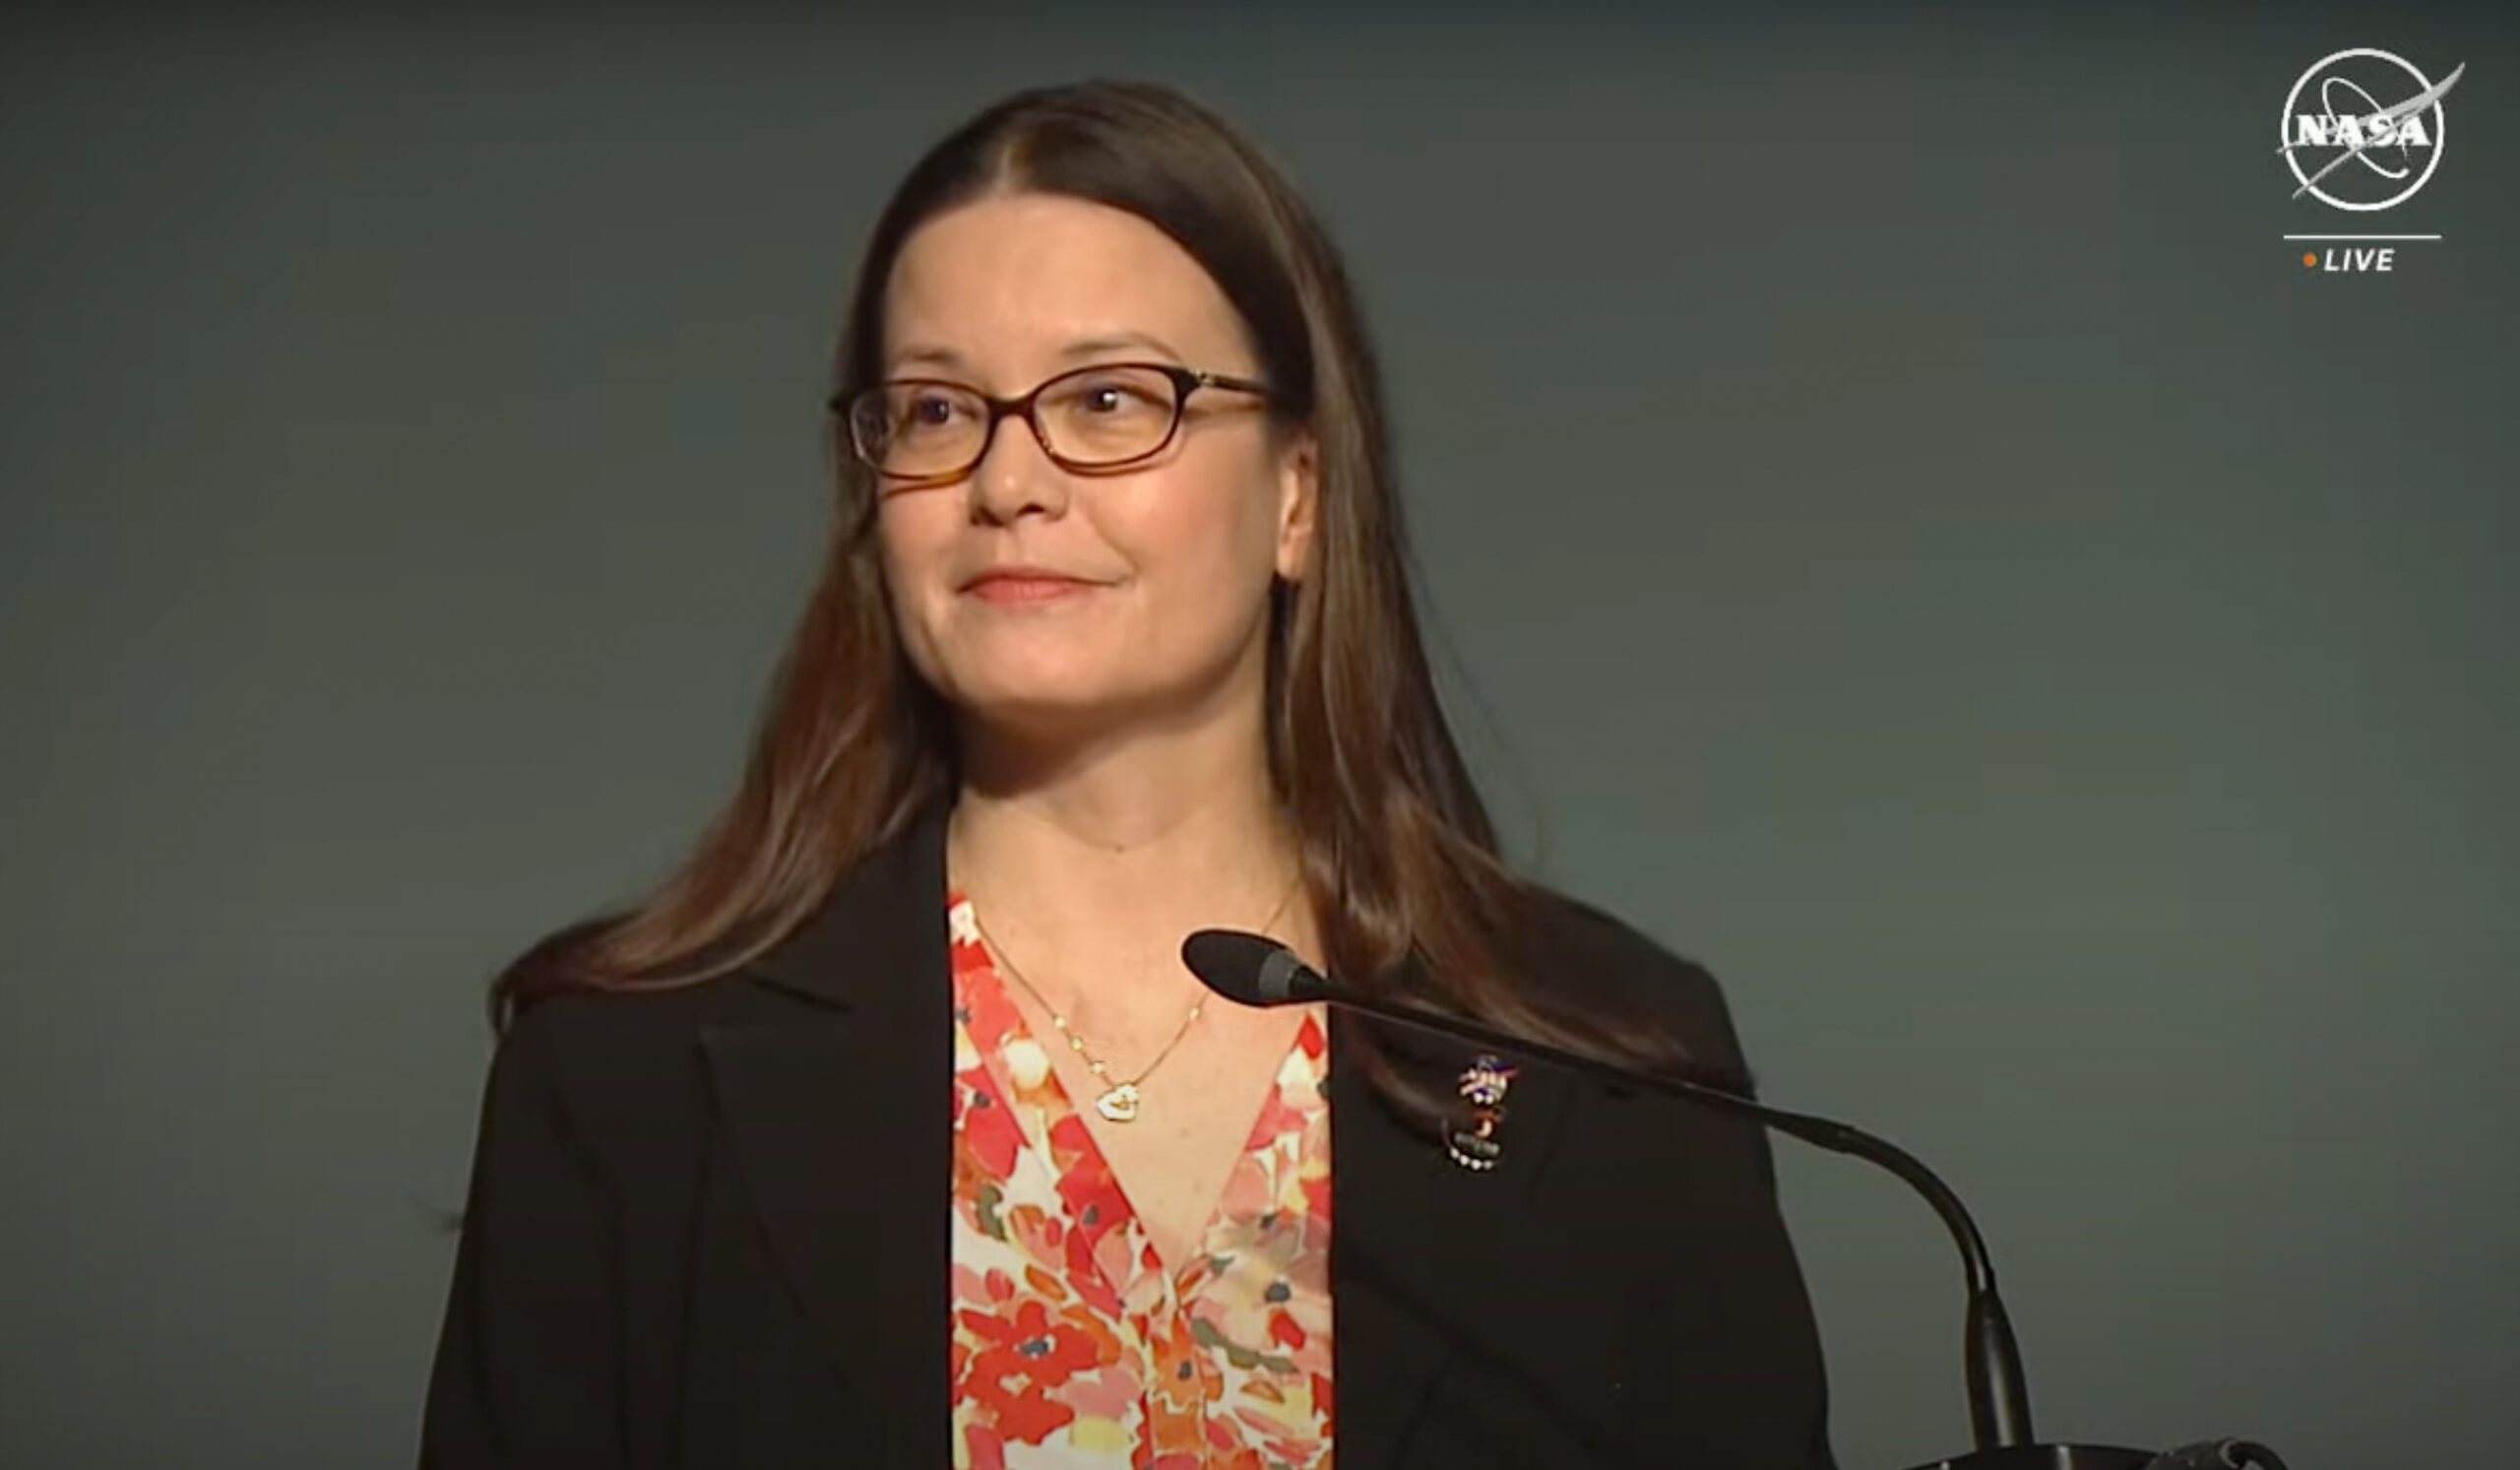 Kelly Korreck, wearing glasses, a flowery shirt, and a black blazer, speaks at a podium on a grey backdrop.